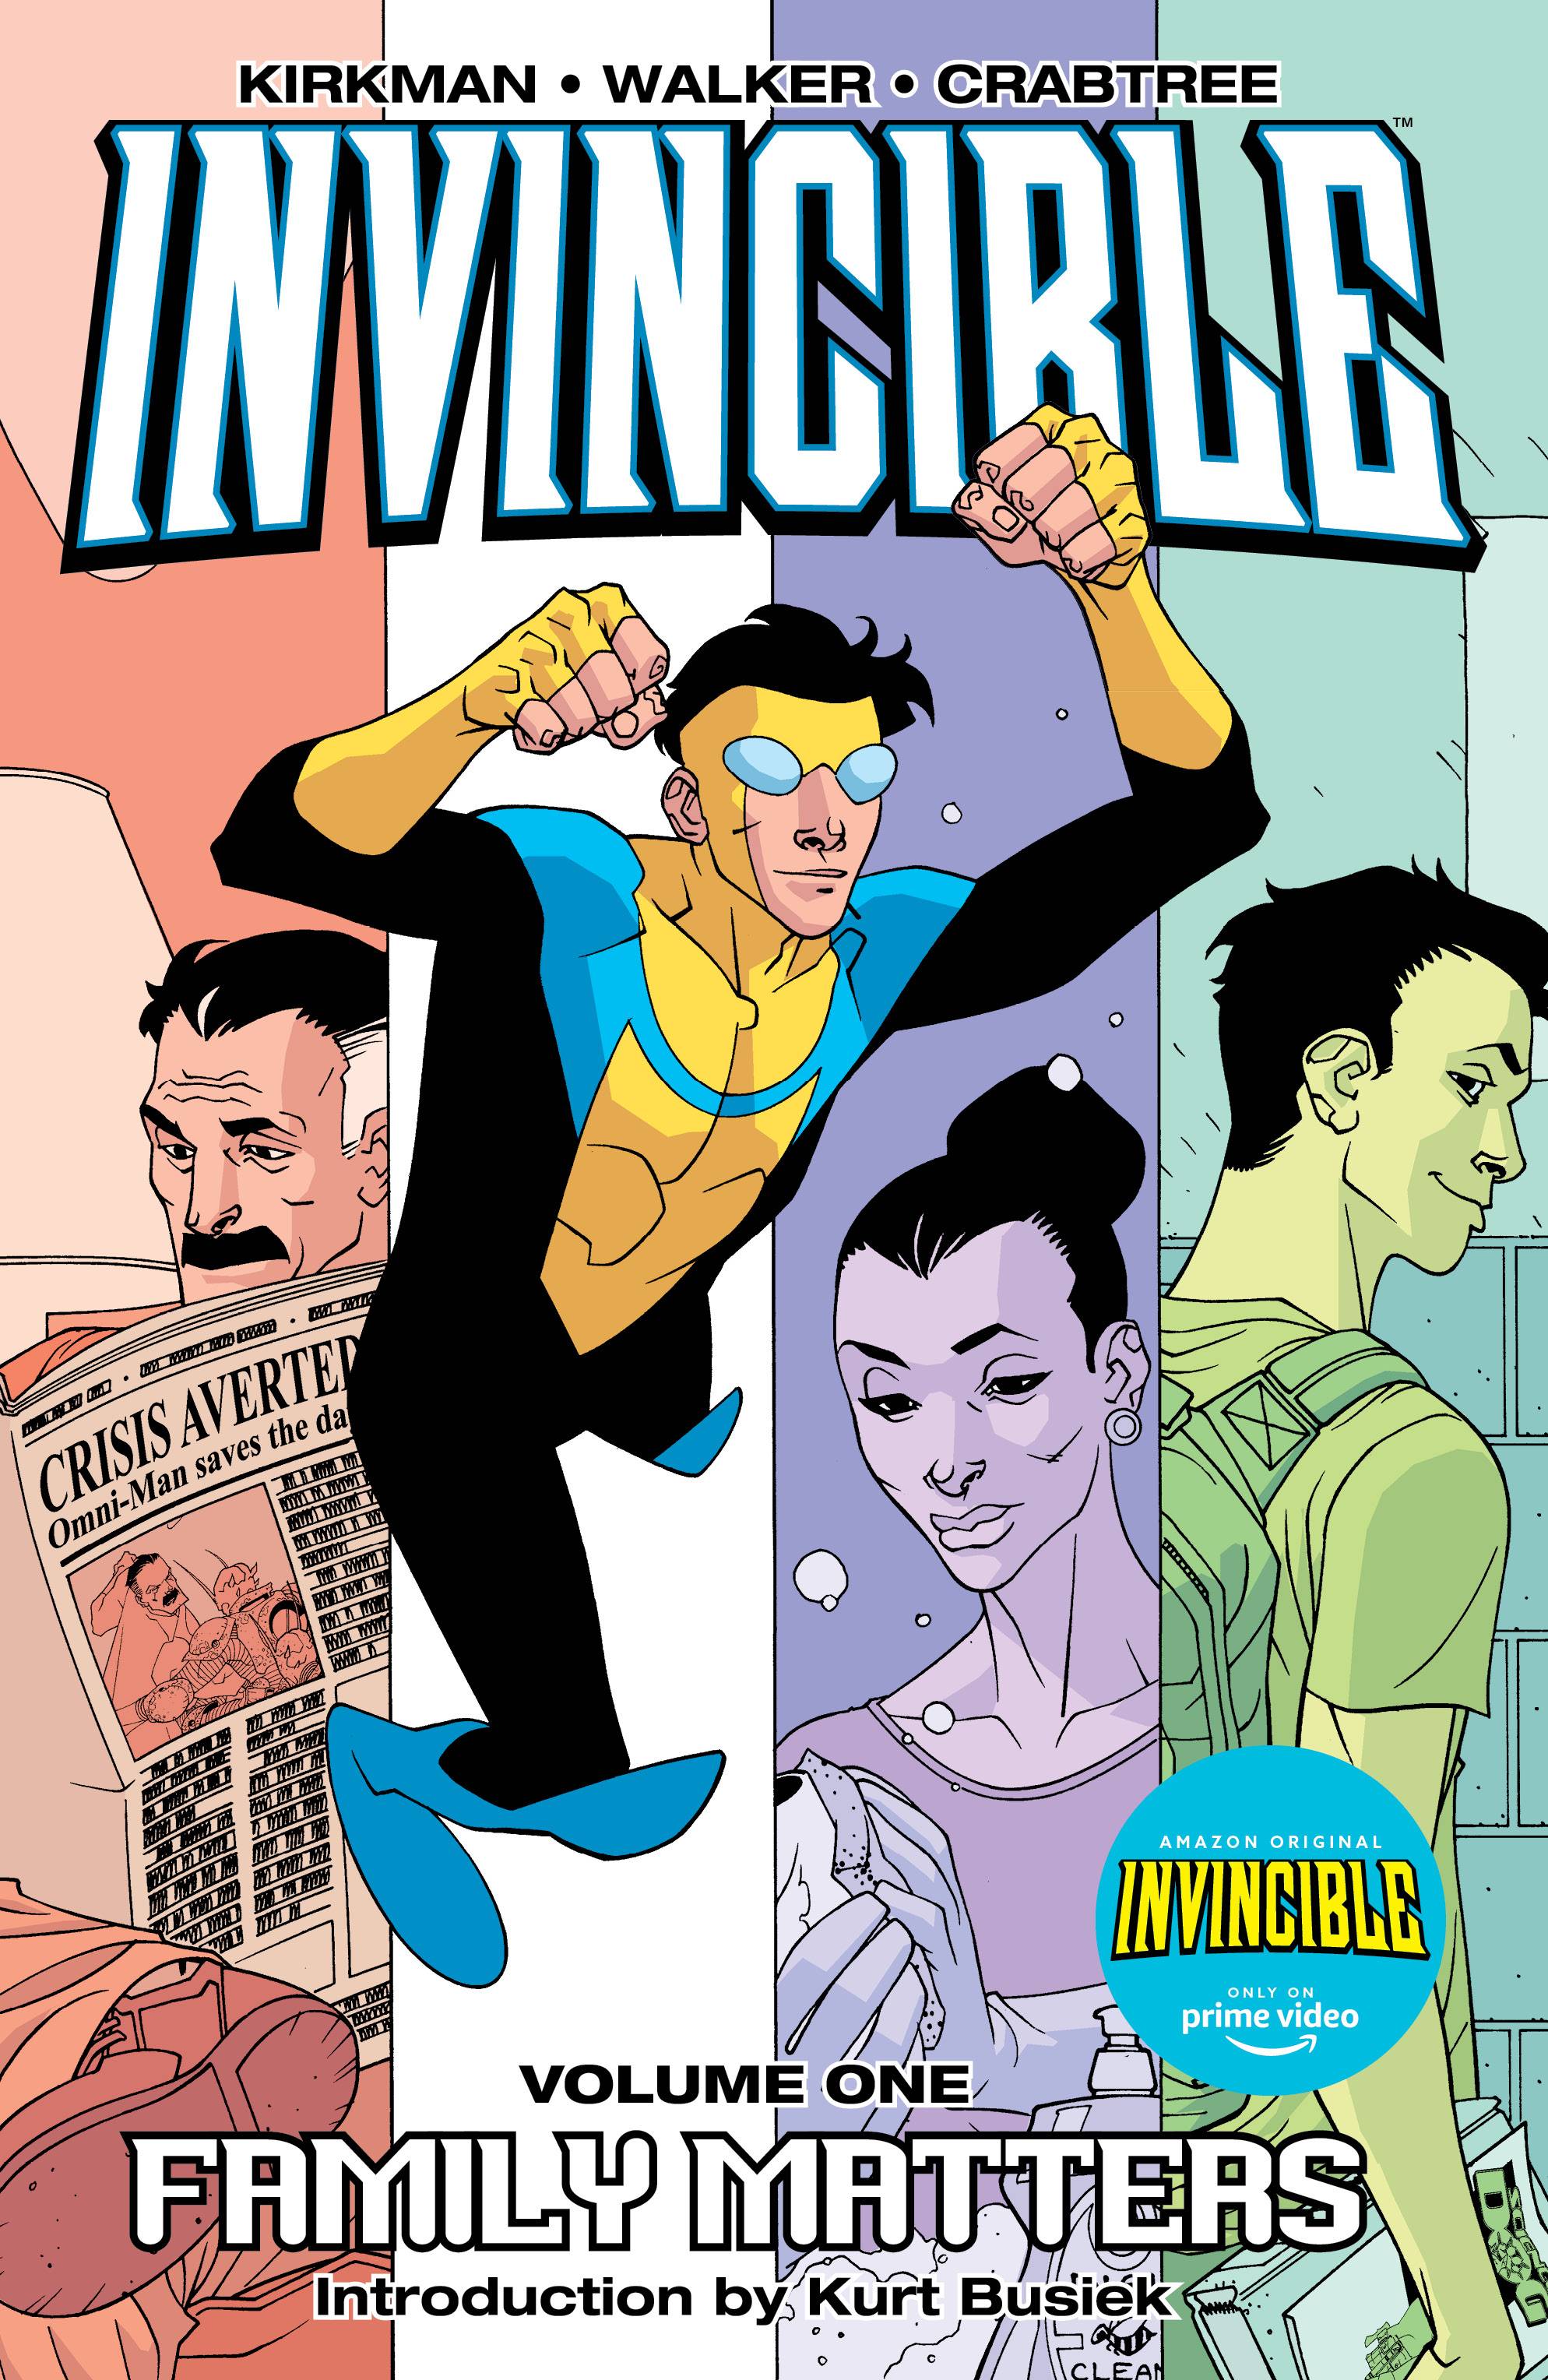 Invincible Vol 01 Family Matters TP (New Printing)